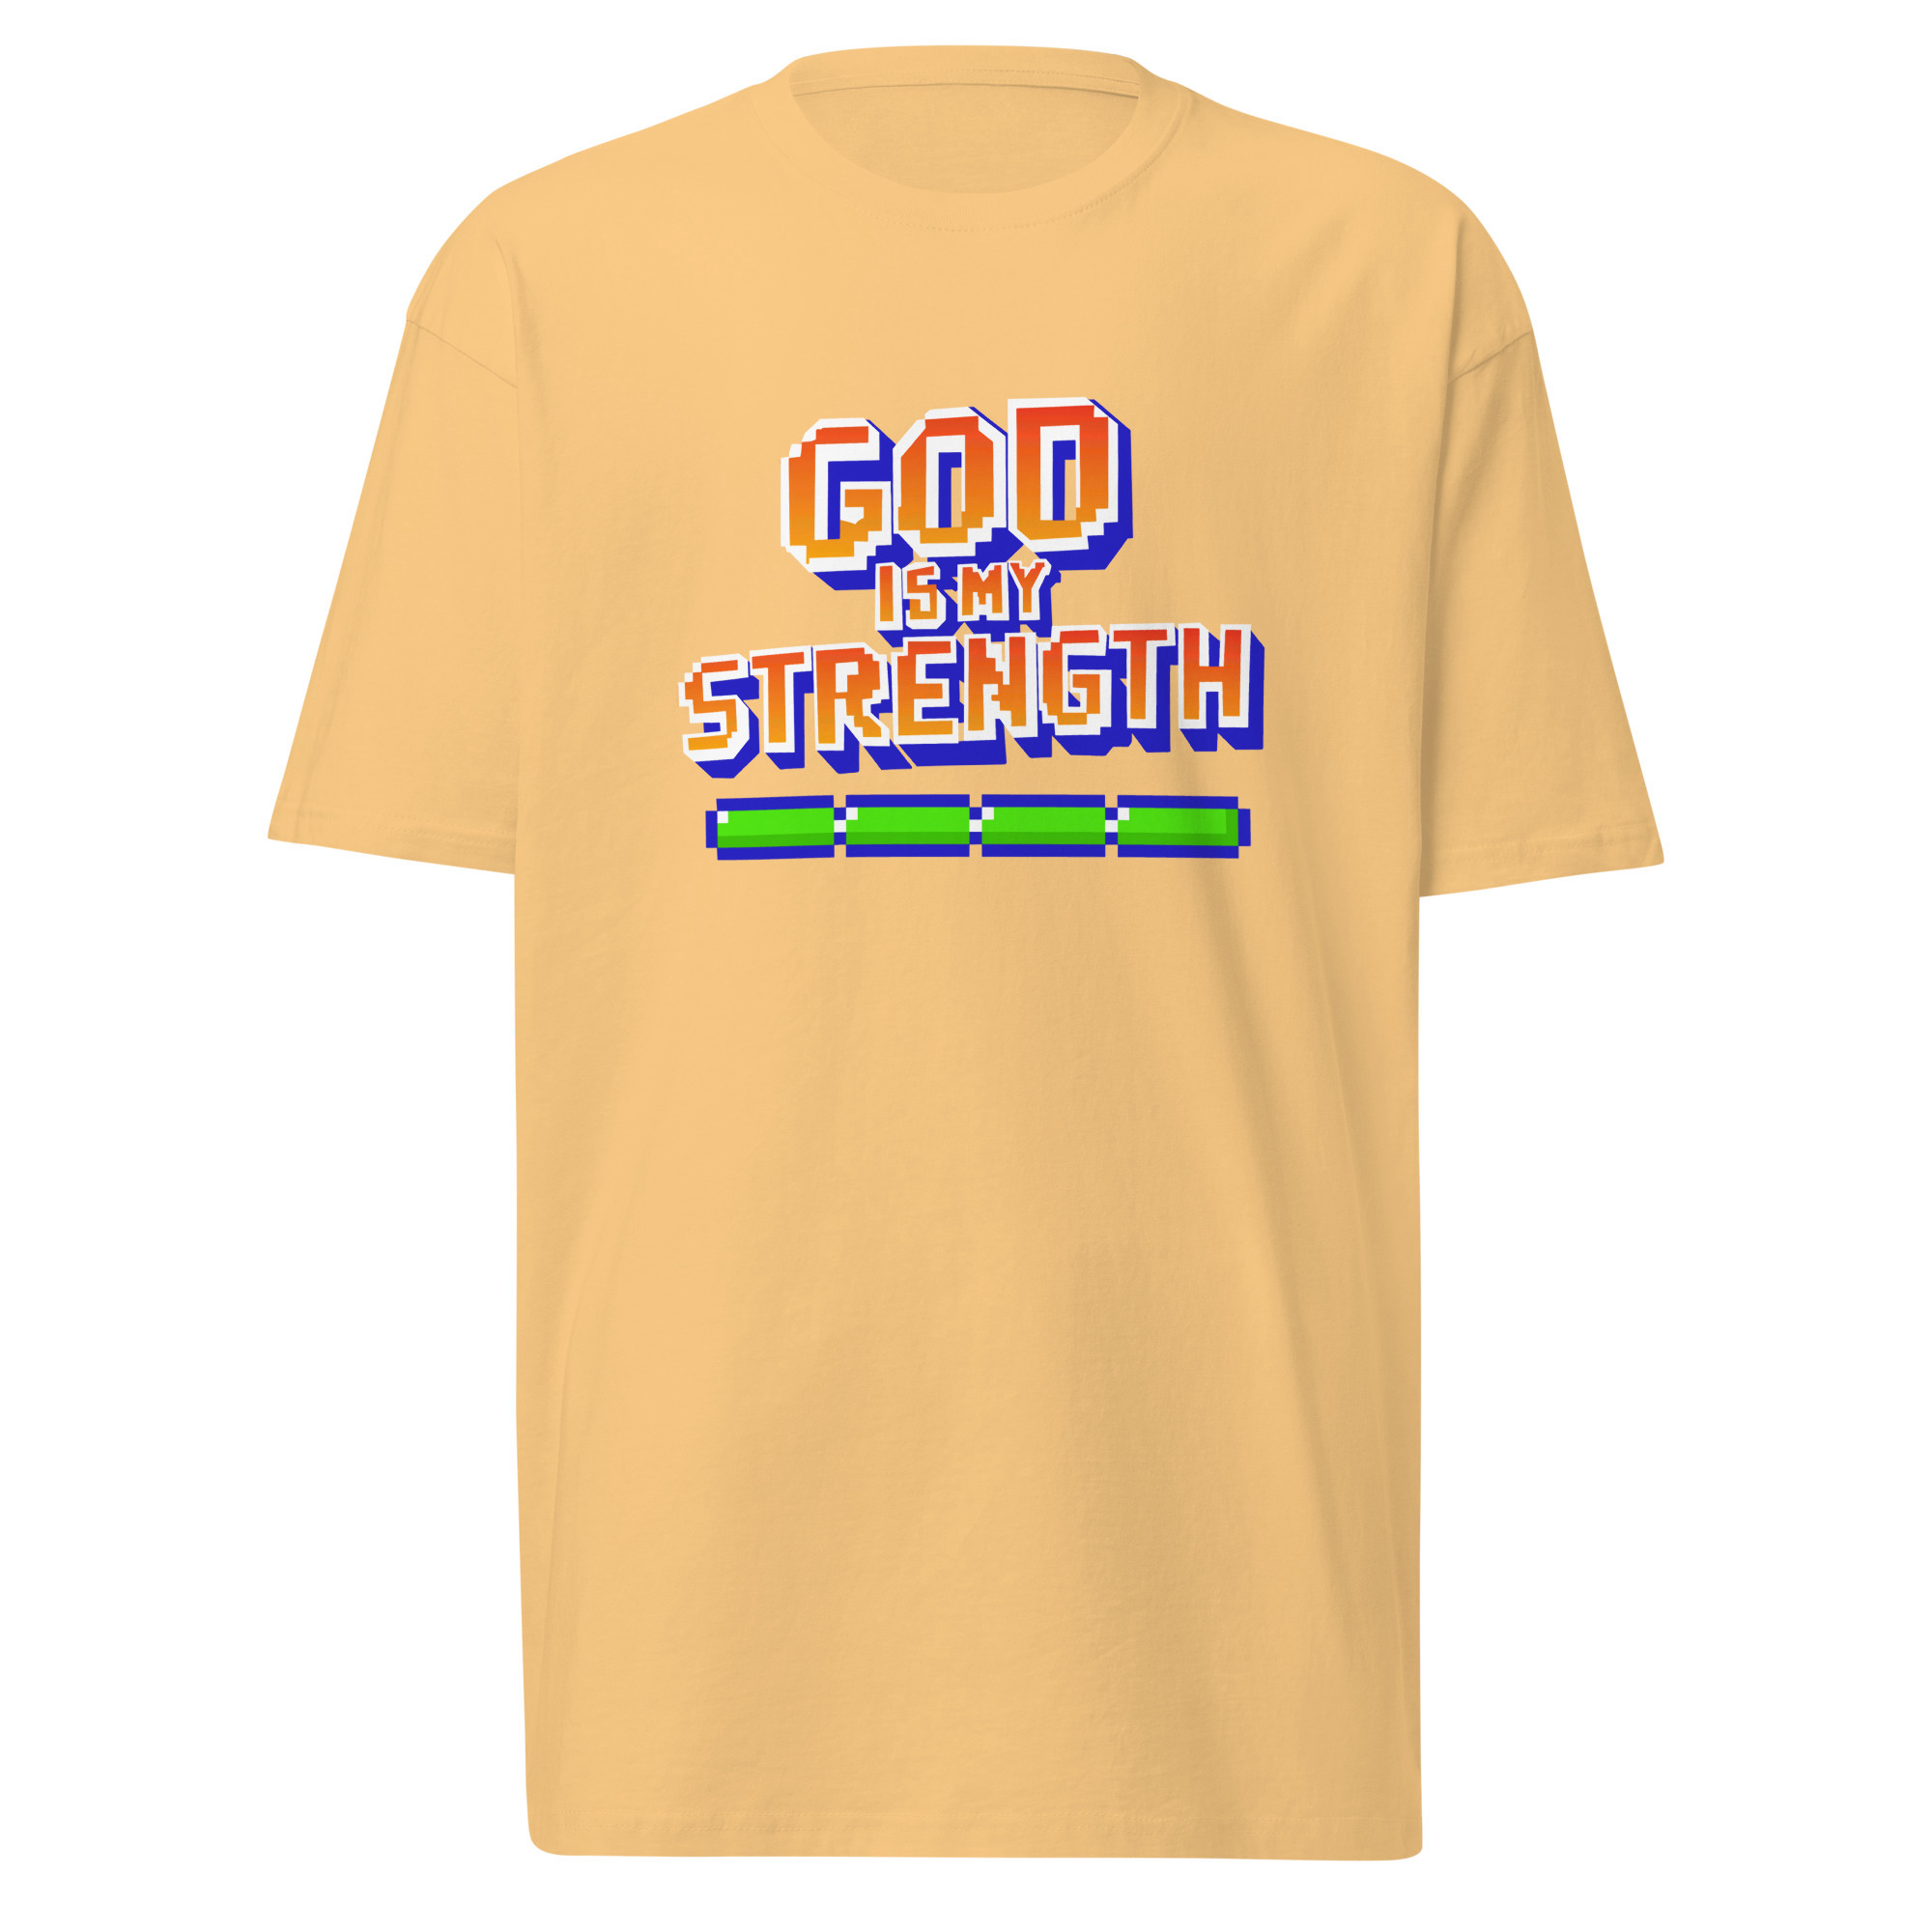 God is my Strength T-Shirt - Vintage Gold / S